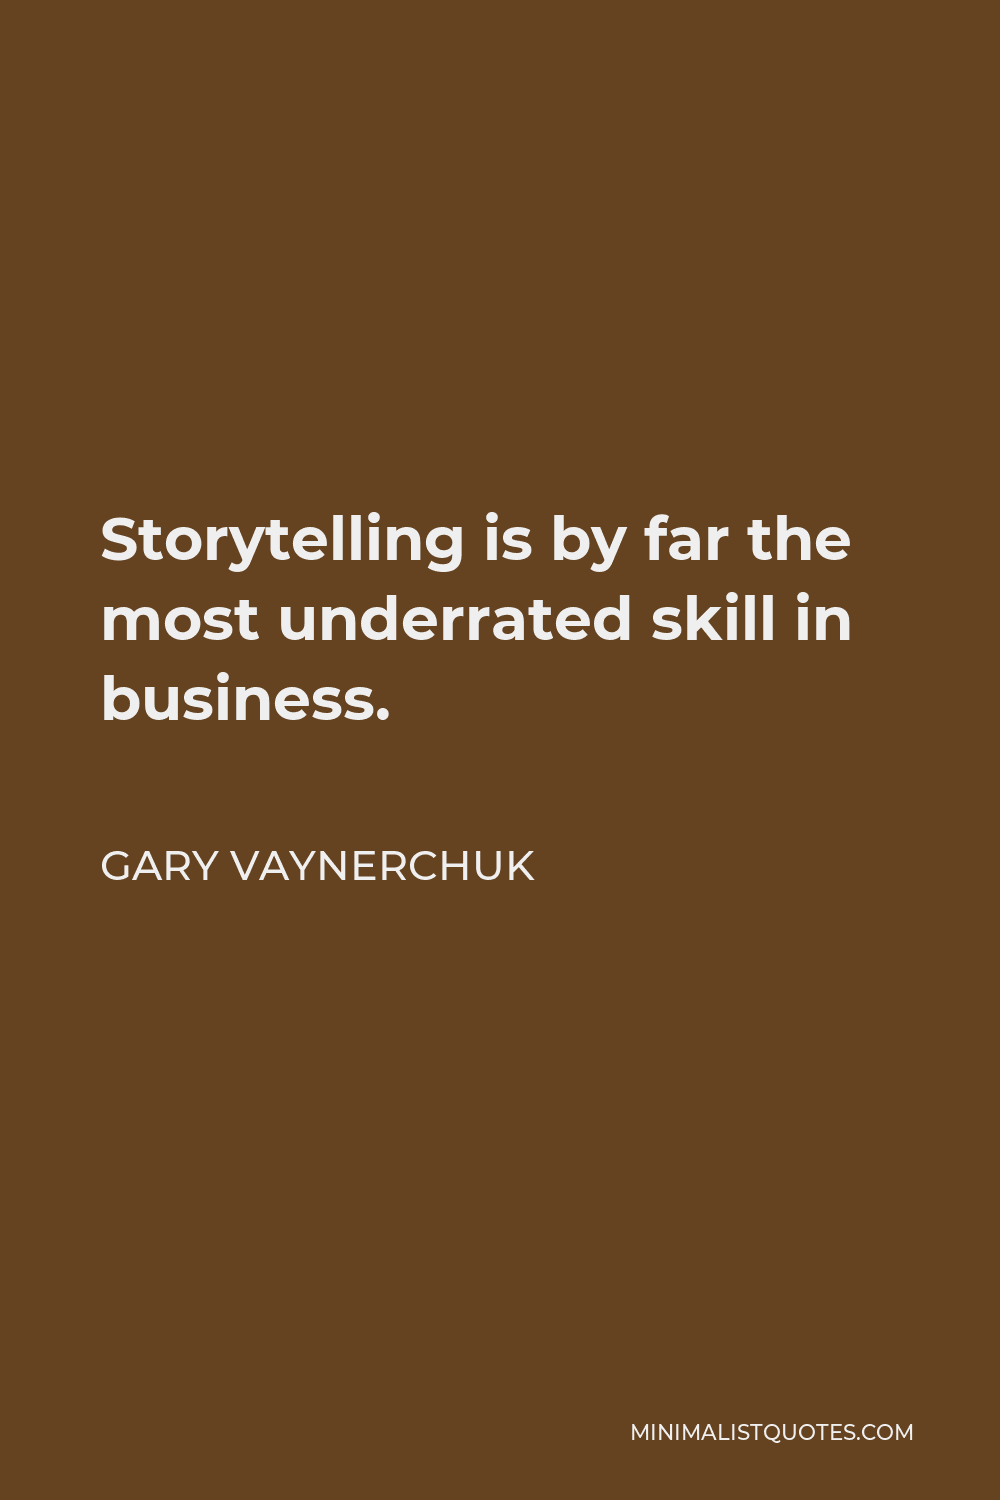 Gary Vaynerchuk Quote - Storytelling is by far the most underrated skill in business.